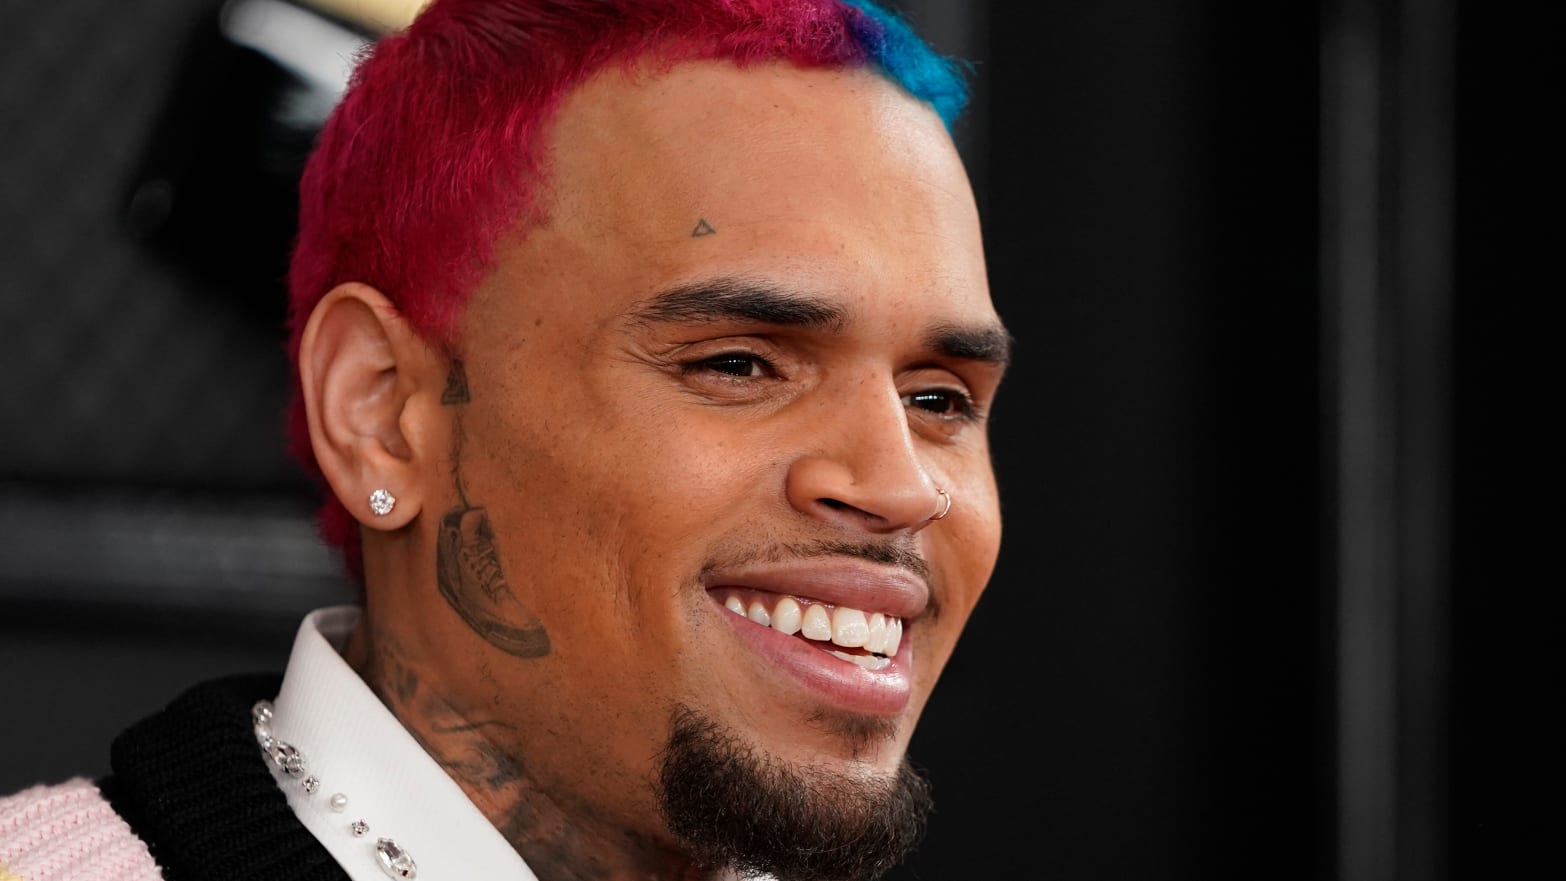 Chris Brown pictured at the 62nd Grammy Awards 